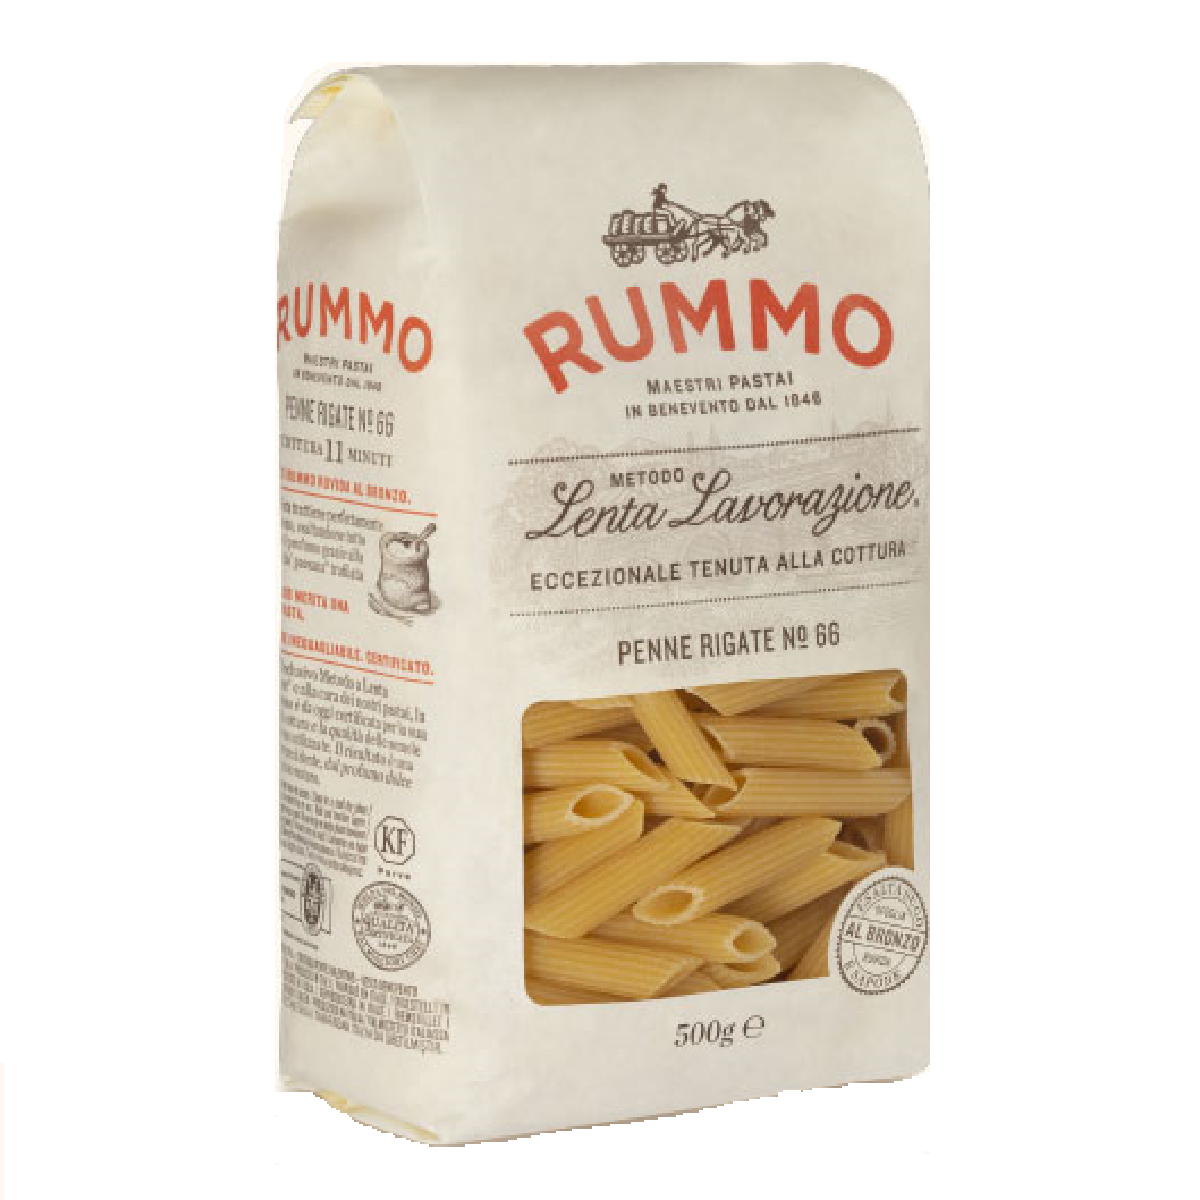 Rummo Penne Rigate No 66 500g